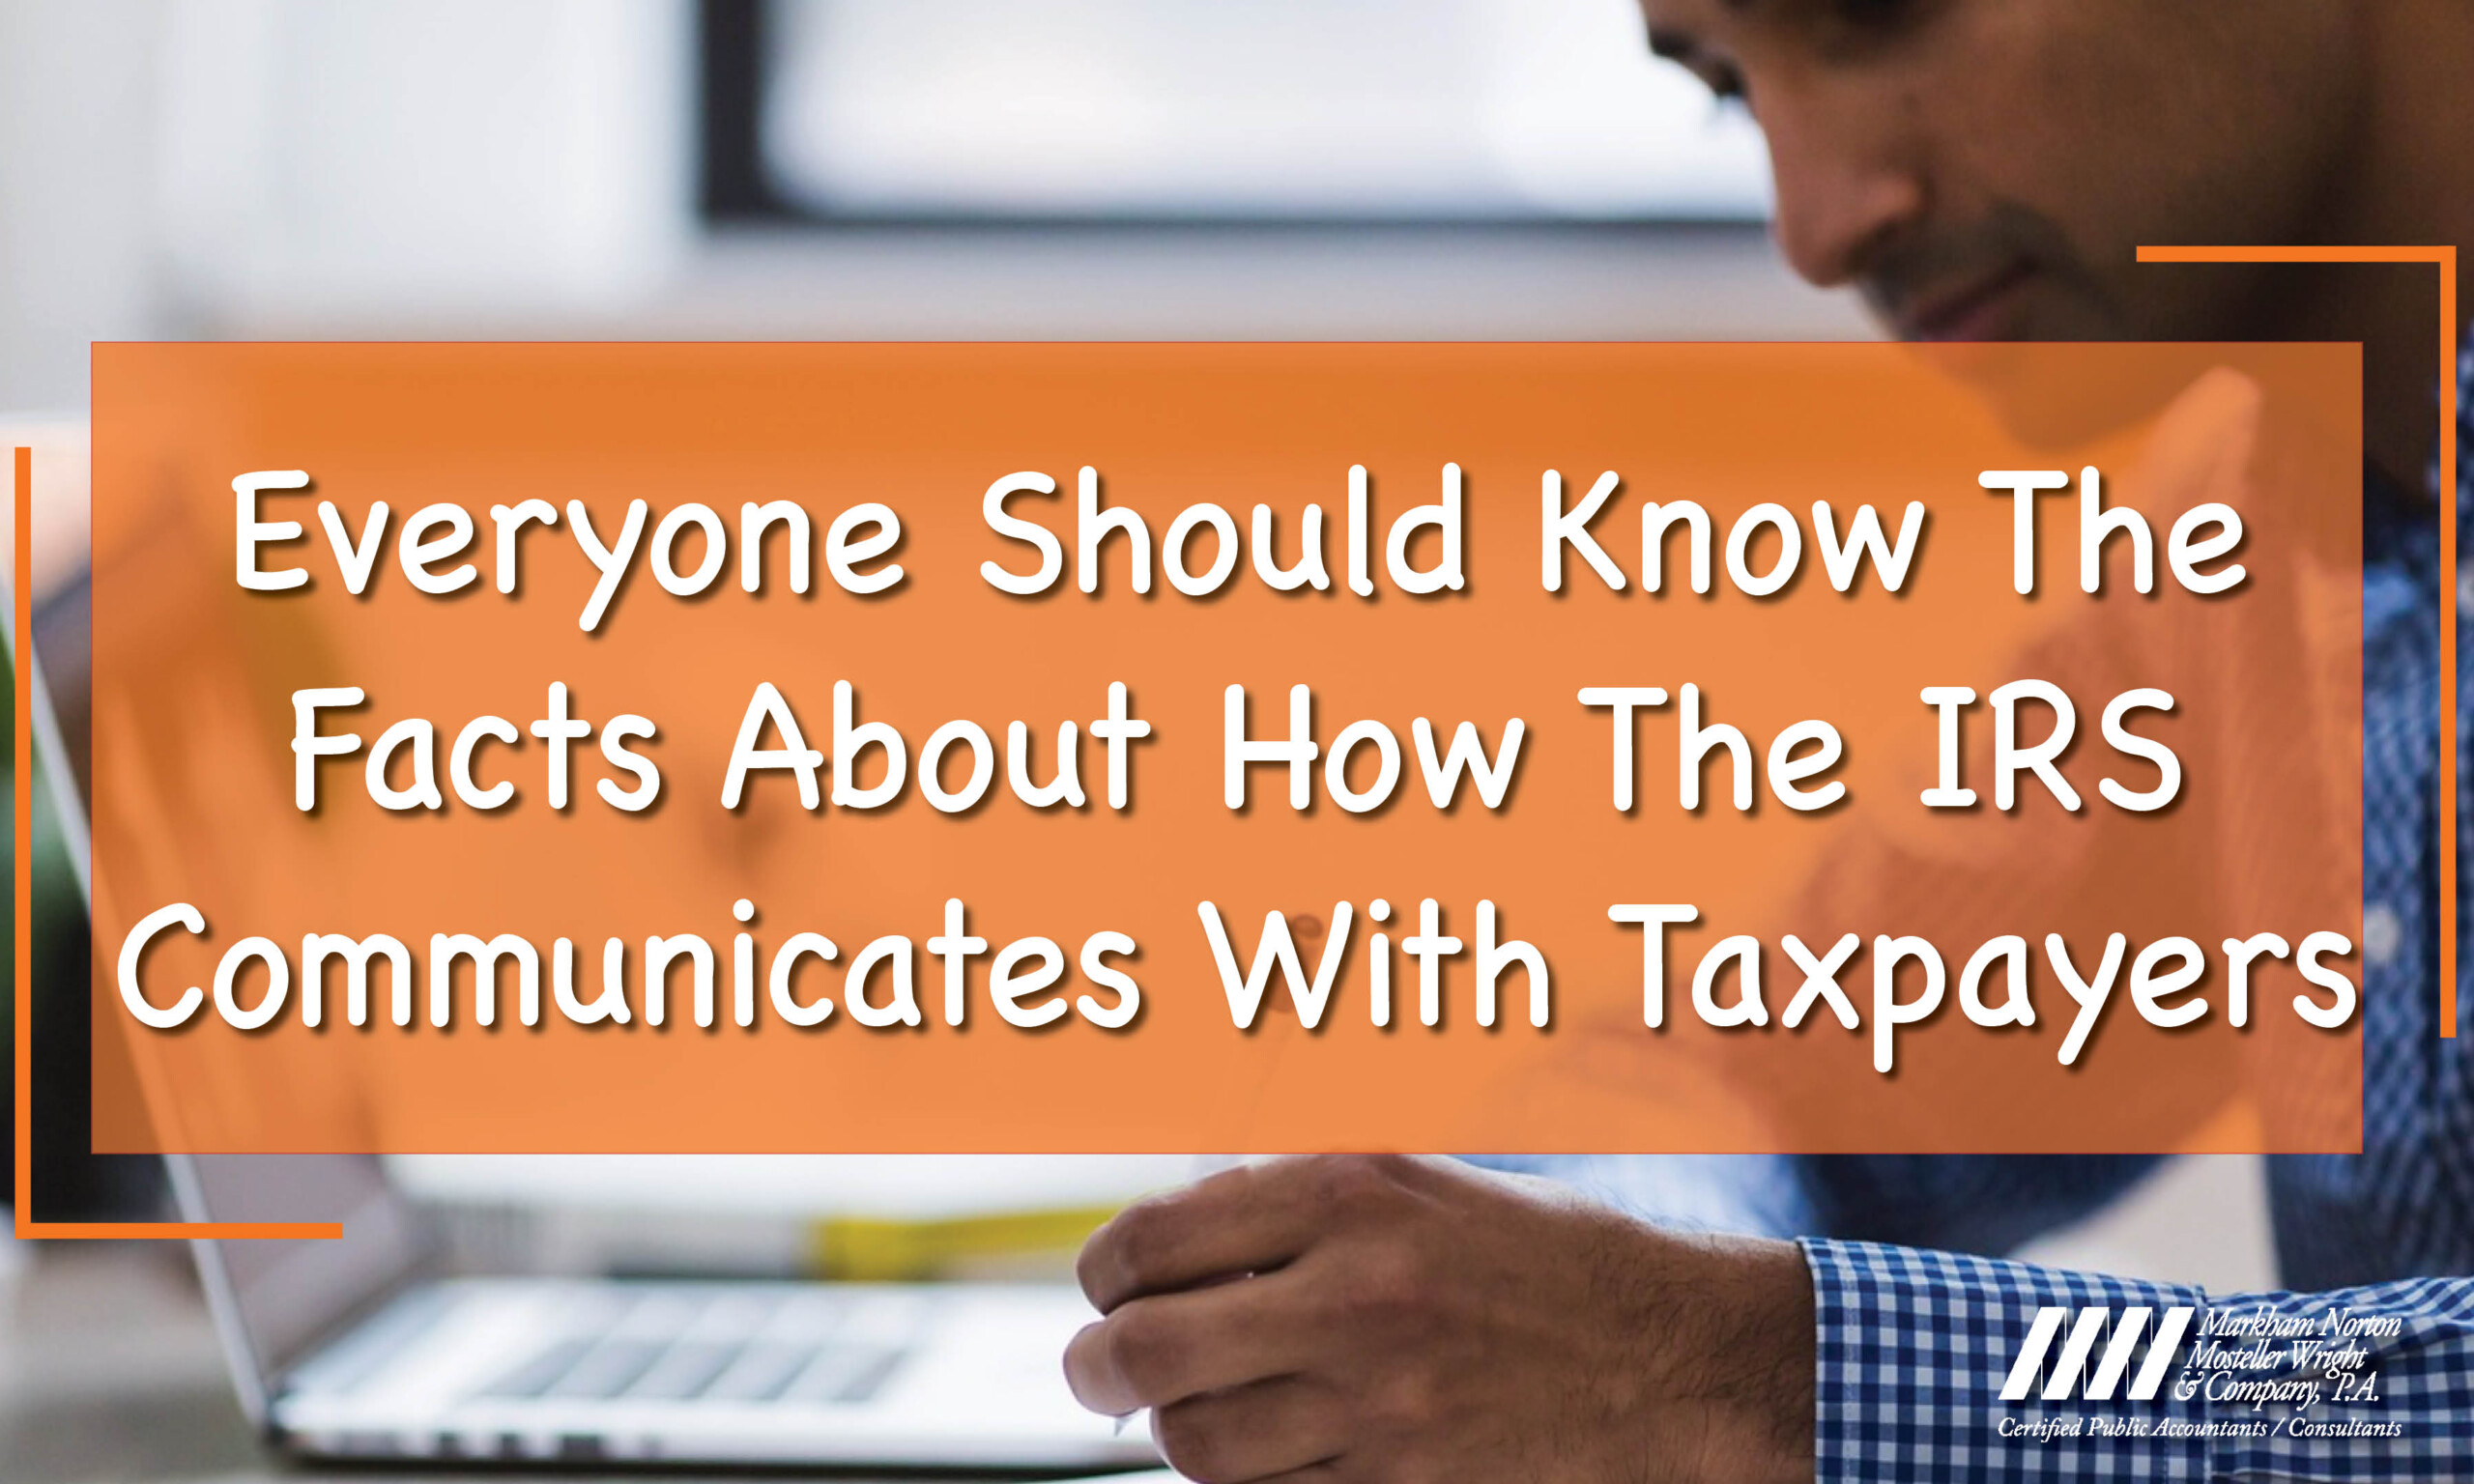 Everyone Should Know The Facts About How The IRS Communicates With Taxpayers